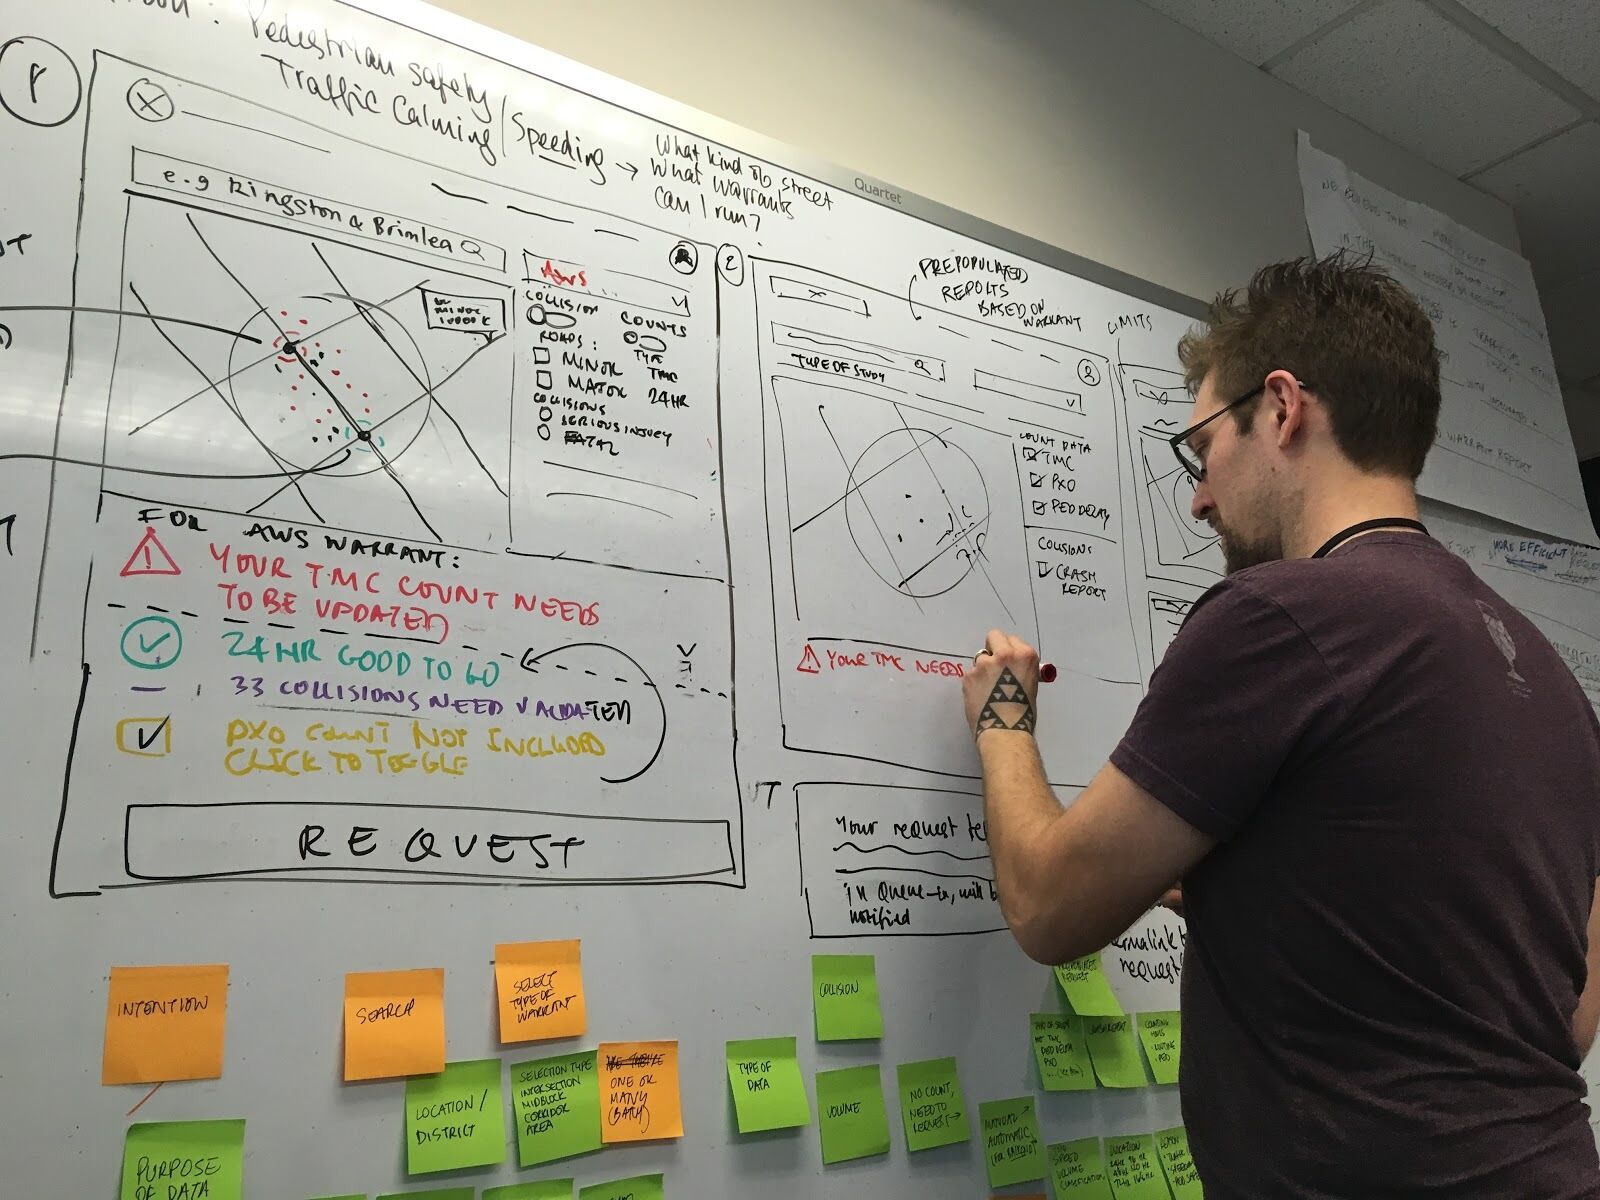 Evan Savage, lead developer on MOVE, writing on a whiteboard